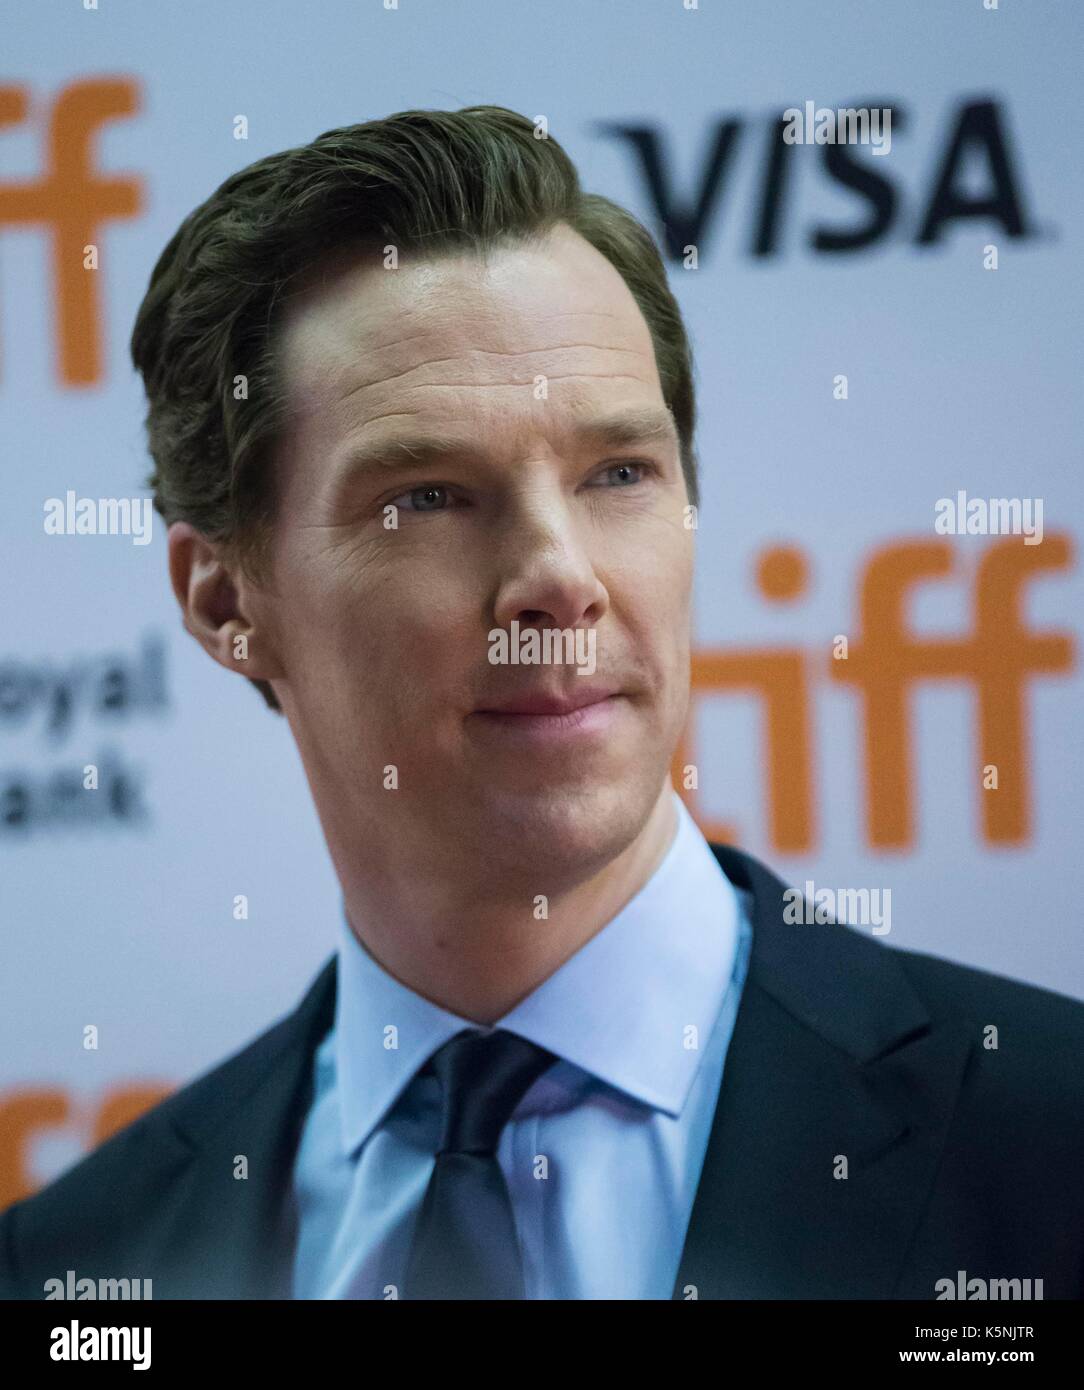 Toronto, Canada. 9th Sep, 2017. Actor Benedict Cumberbatch attends the premiere of the film 'The Current War' at Princess of Wales Theatre during the 2017 Toronto International Film Festival in Toronto, Canada, Sept. 9, 2017. Credit: Zou Zheng/Xinhua/Alamy Live News Stock Photo